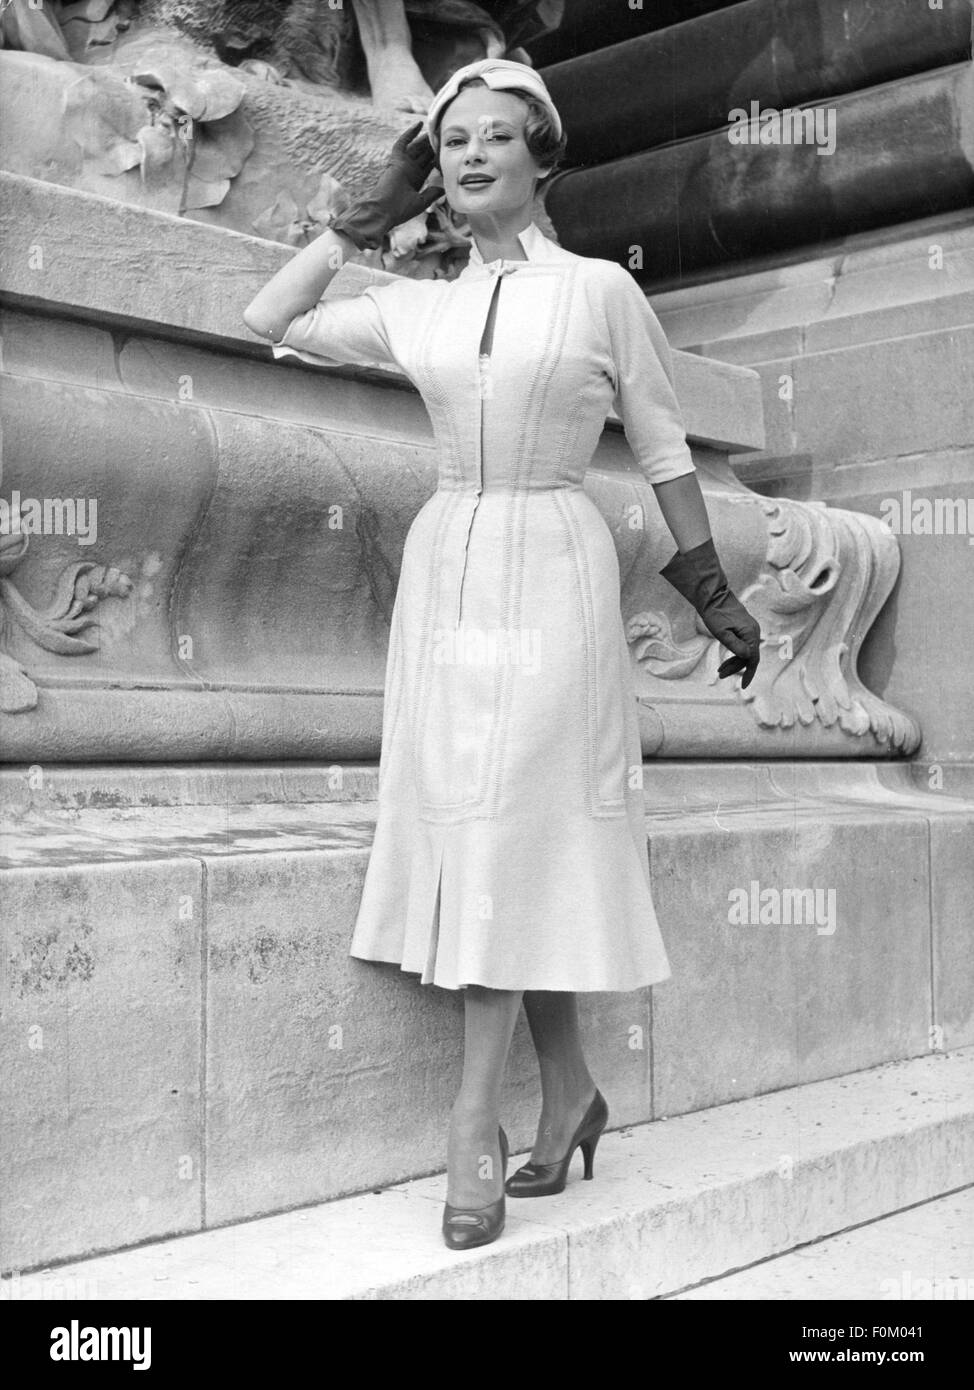 Mode, 50er Jahre, Frau im Wollkleid, 50er Jahre,  Additional-Rights-Clearences-not available Stockfotografie - Alamy